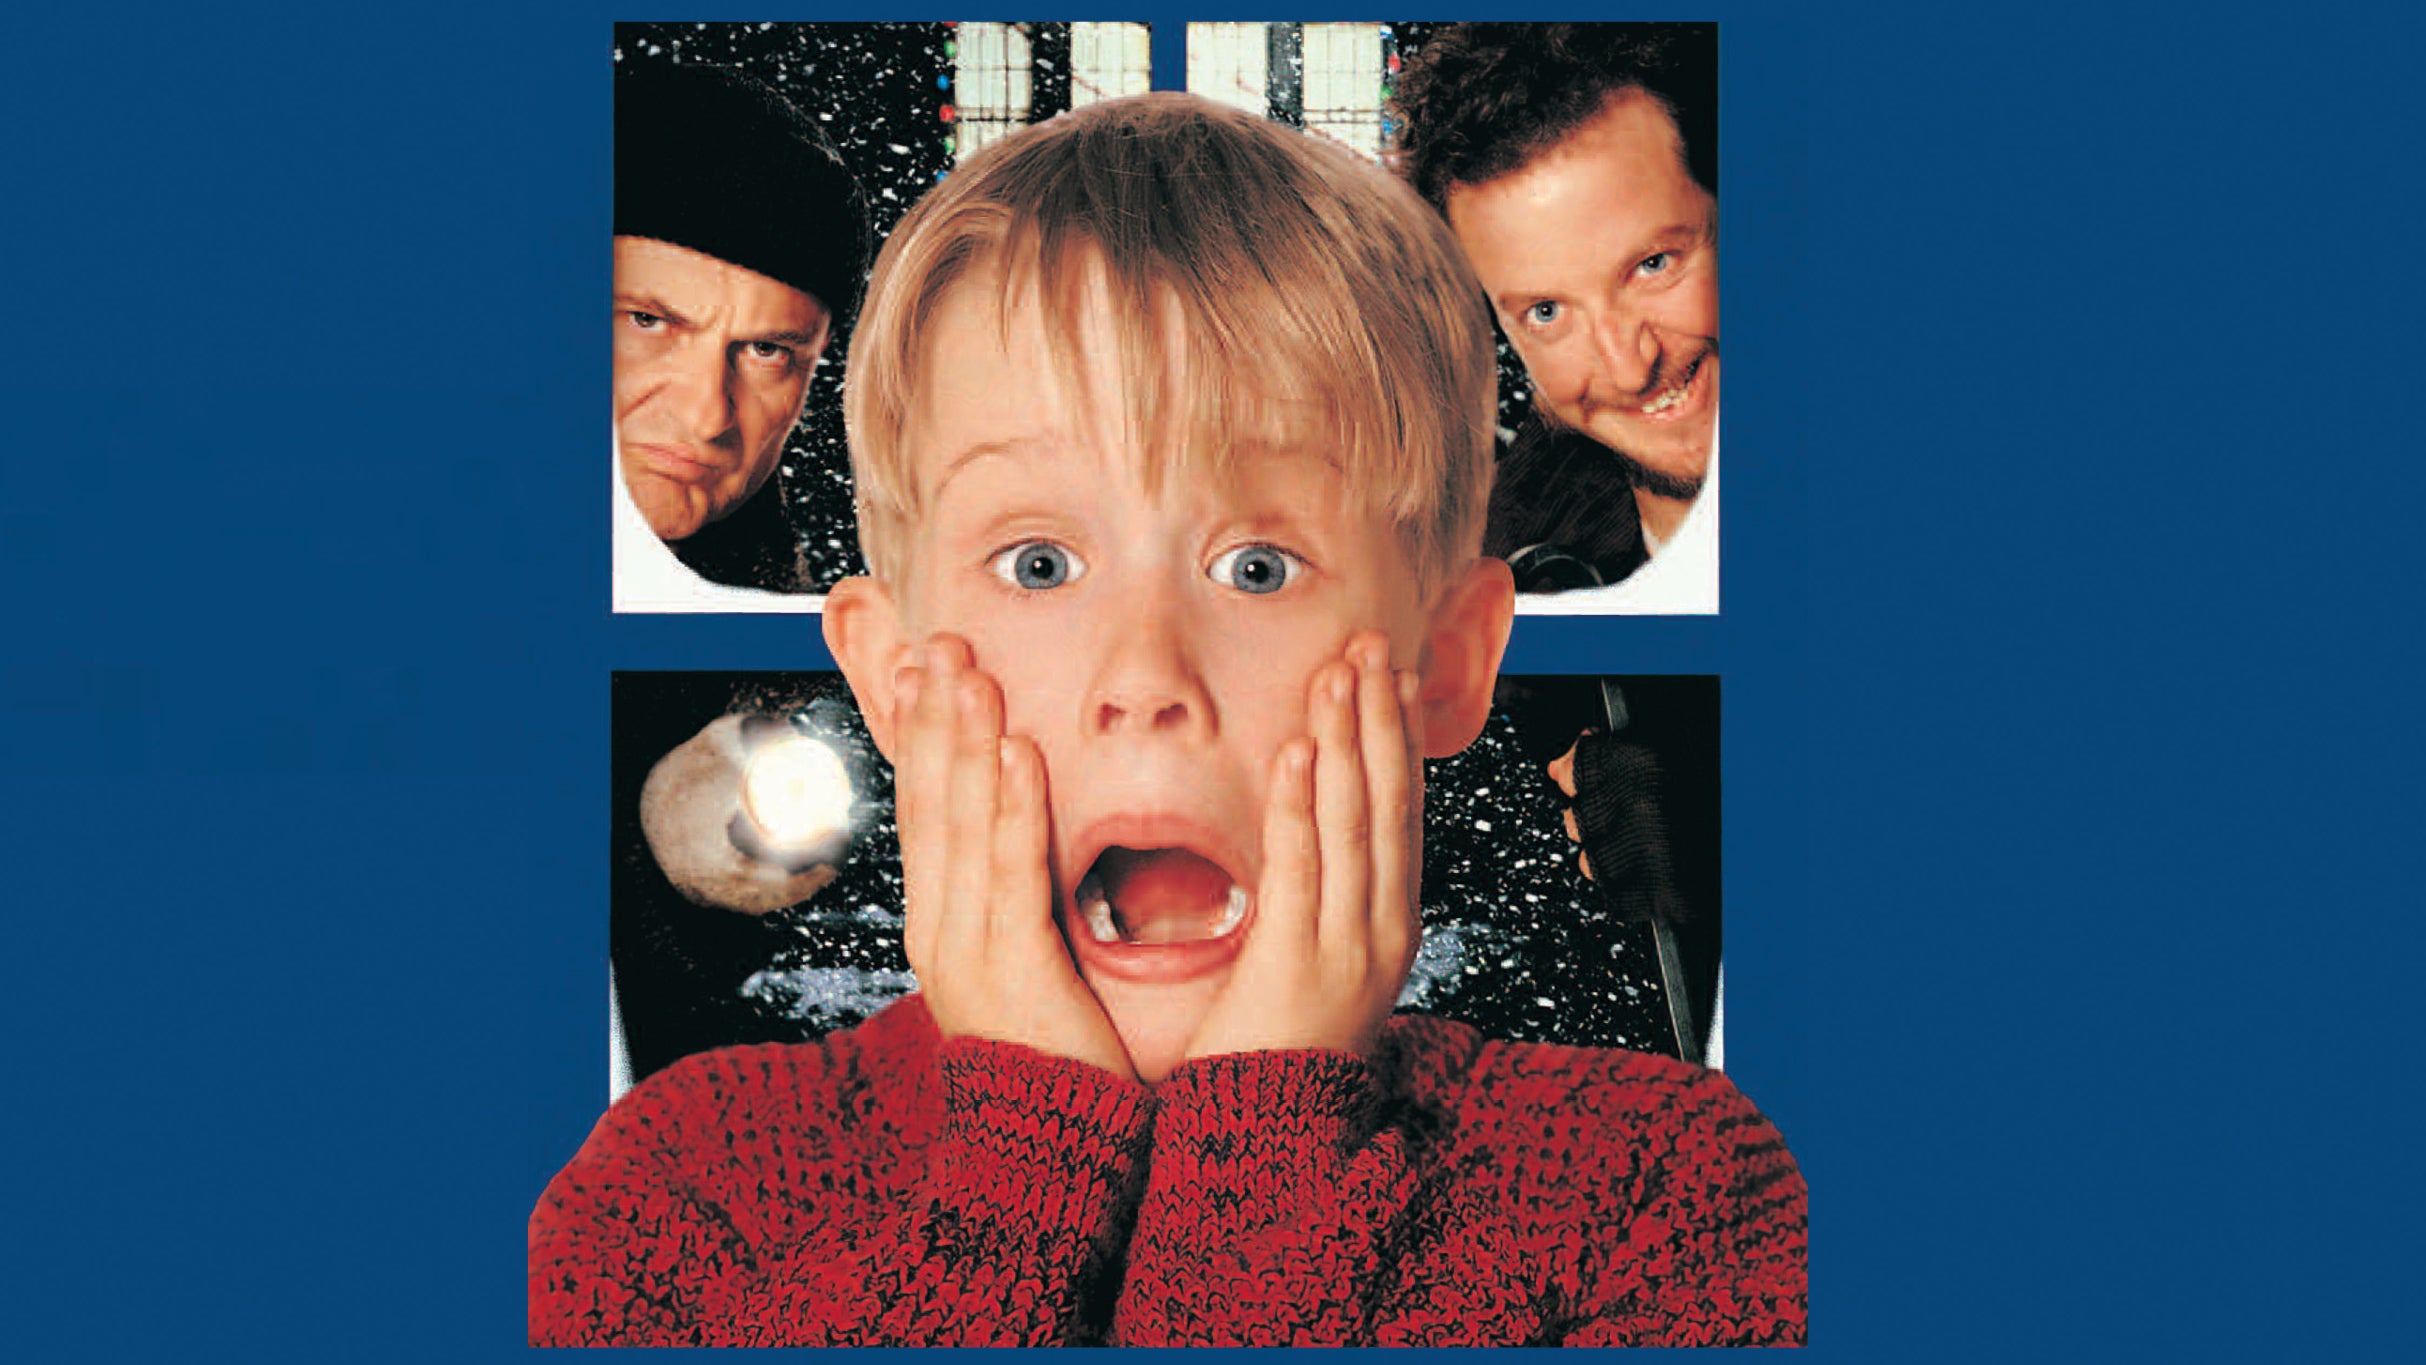 Home Alone in Concert in Leeds promo photo for Ticketmaster presale offer code